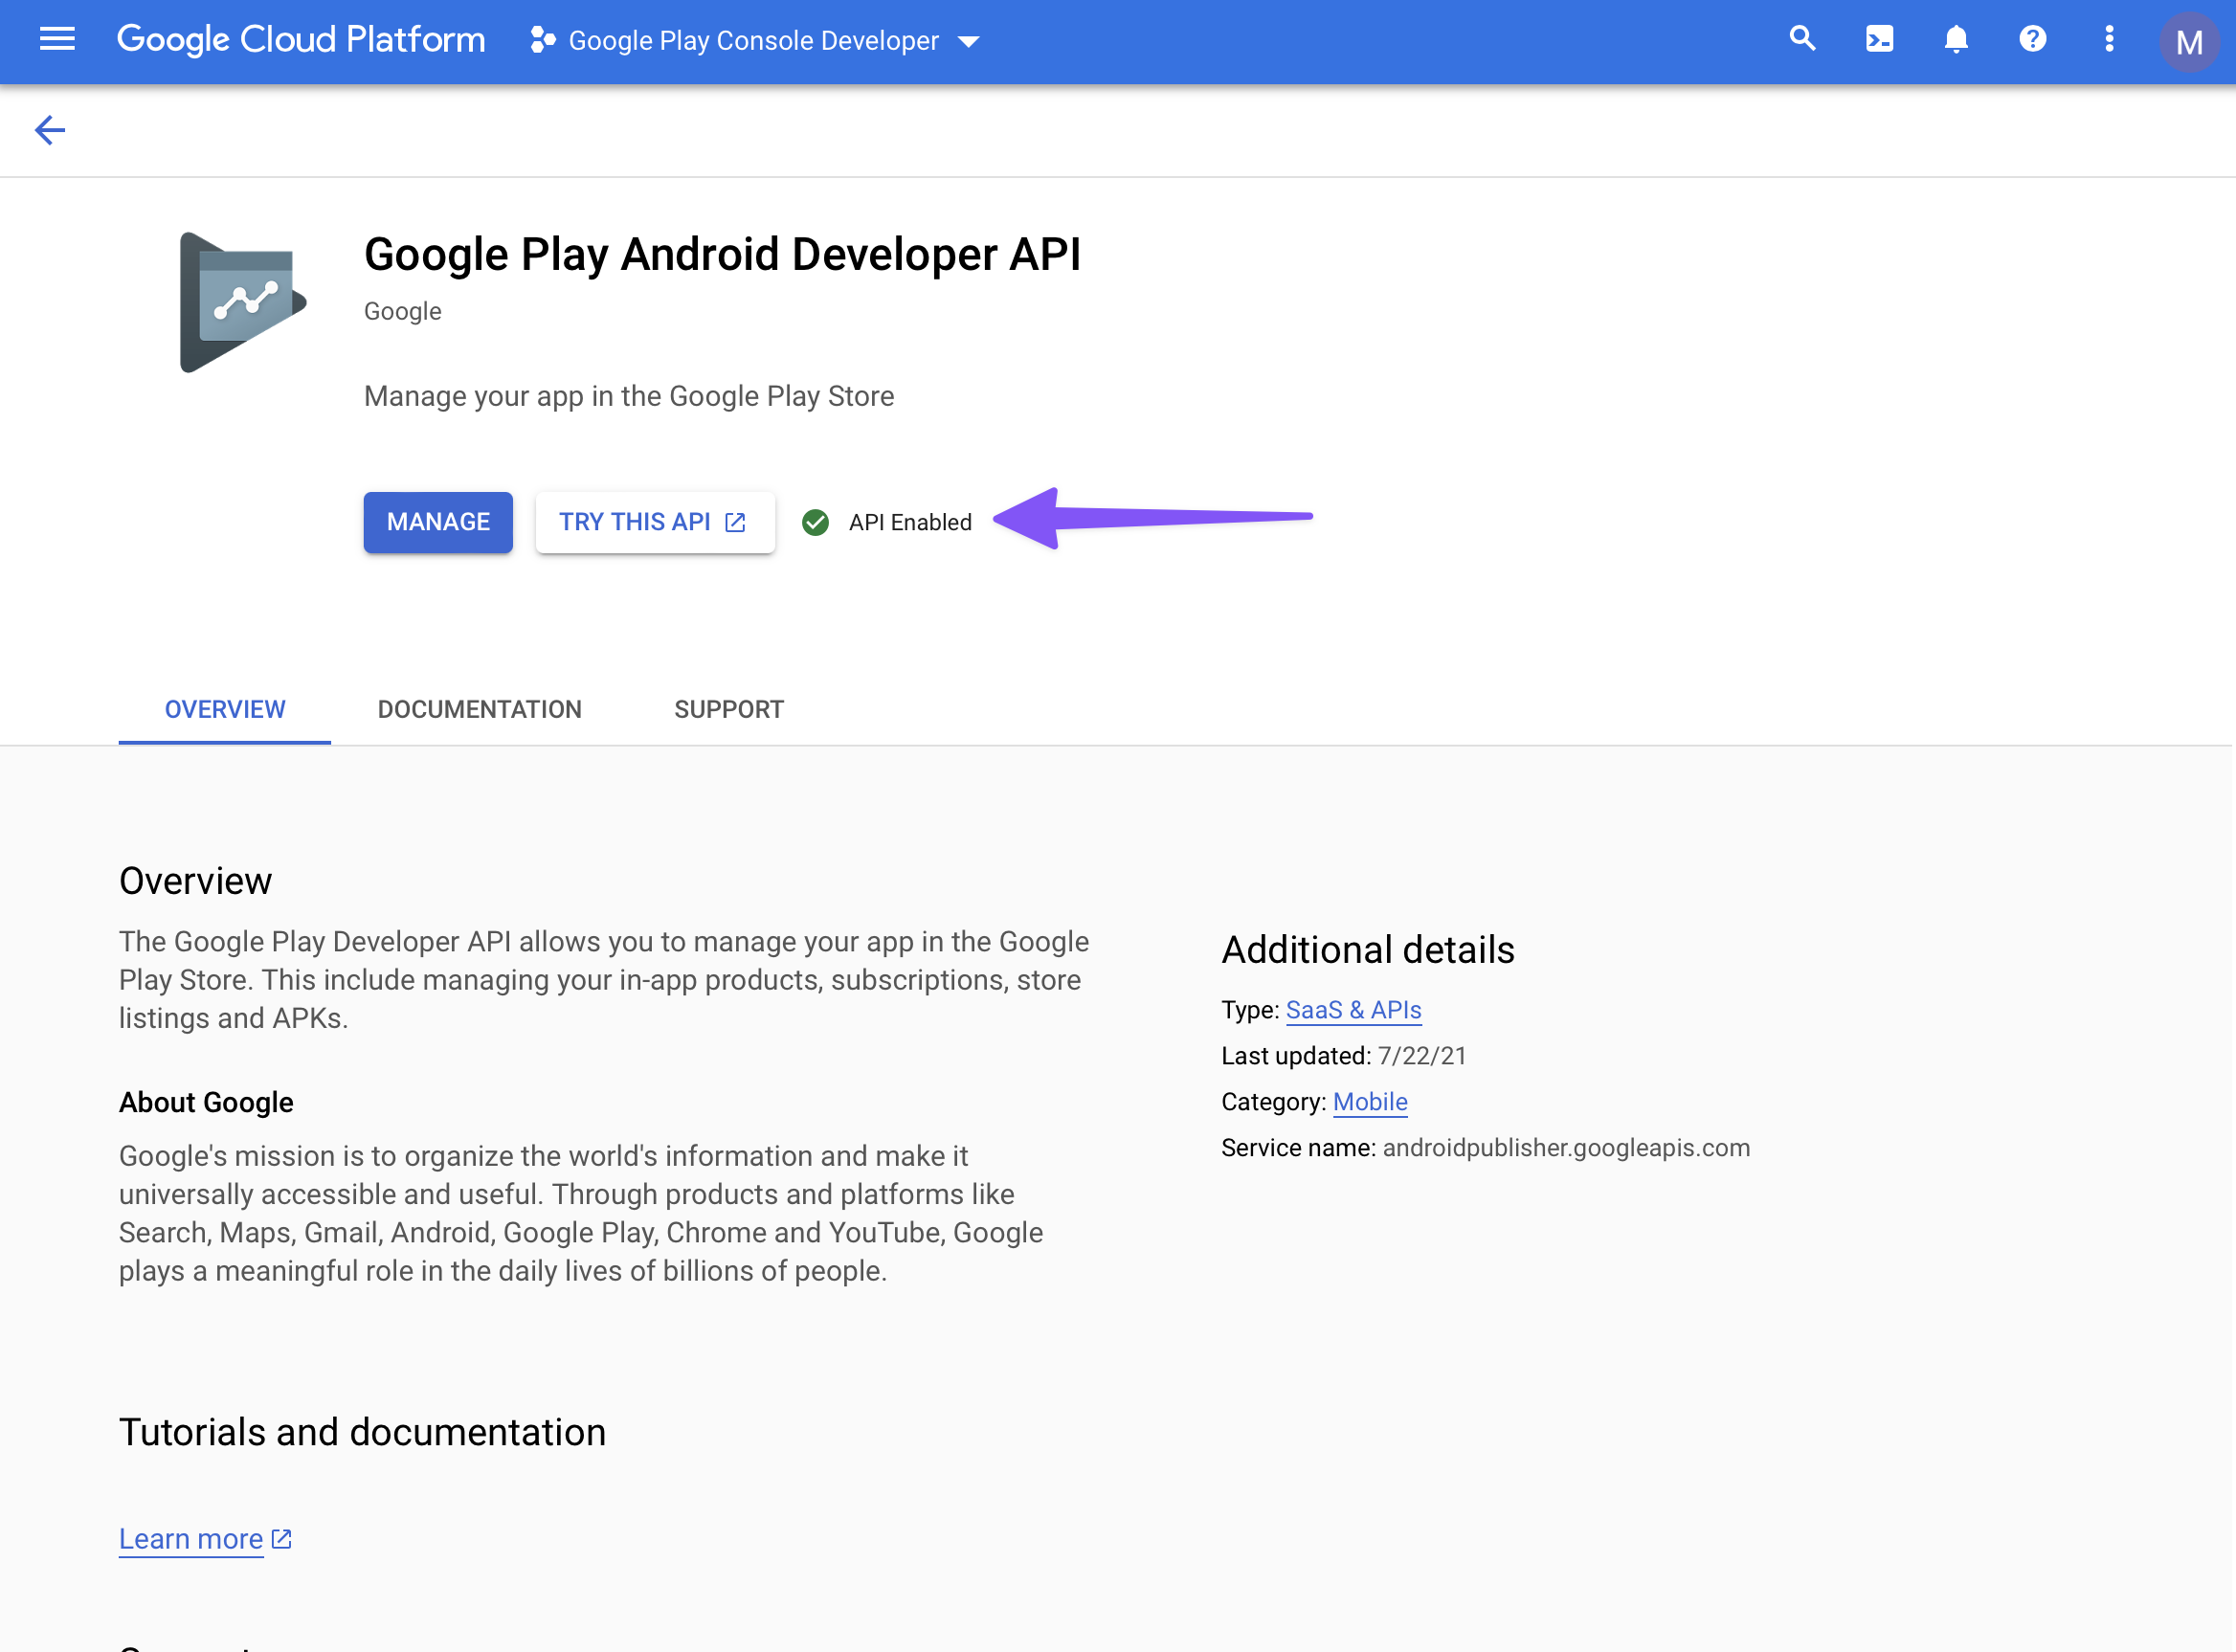 Screenshot showing how to enable the Google Play Android Developer API